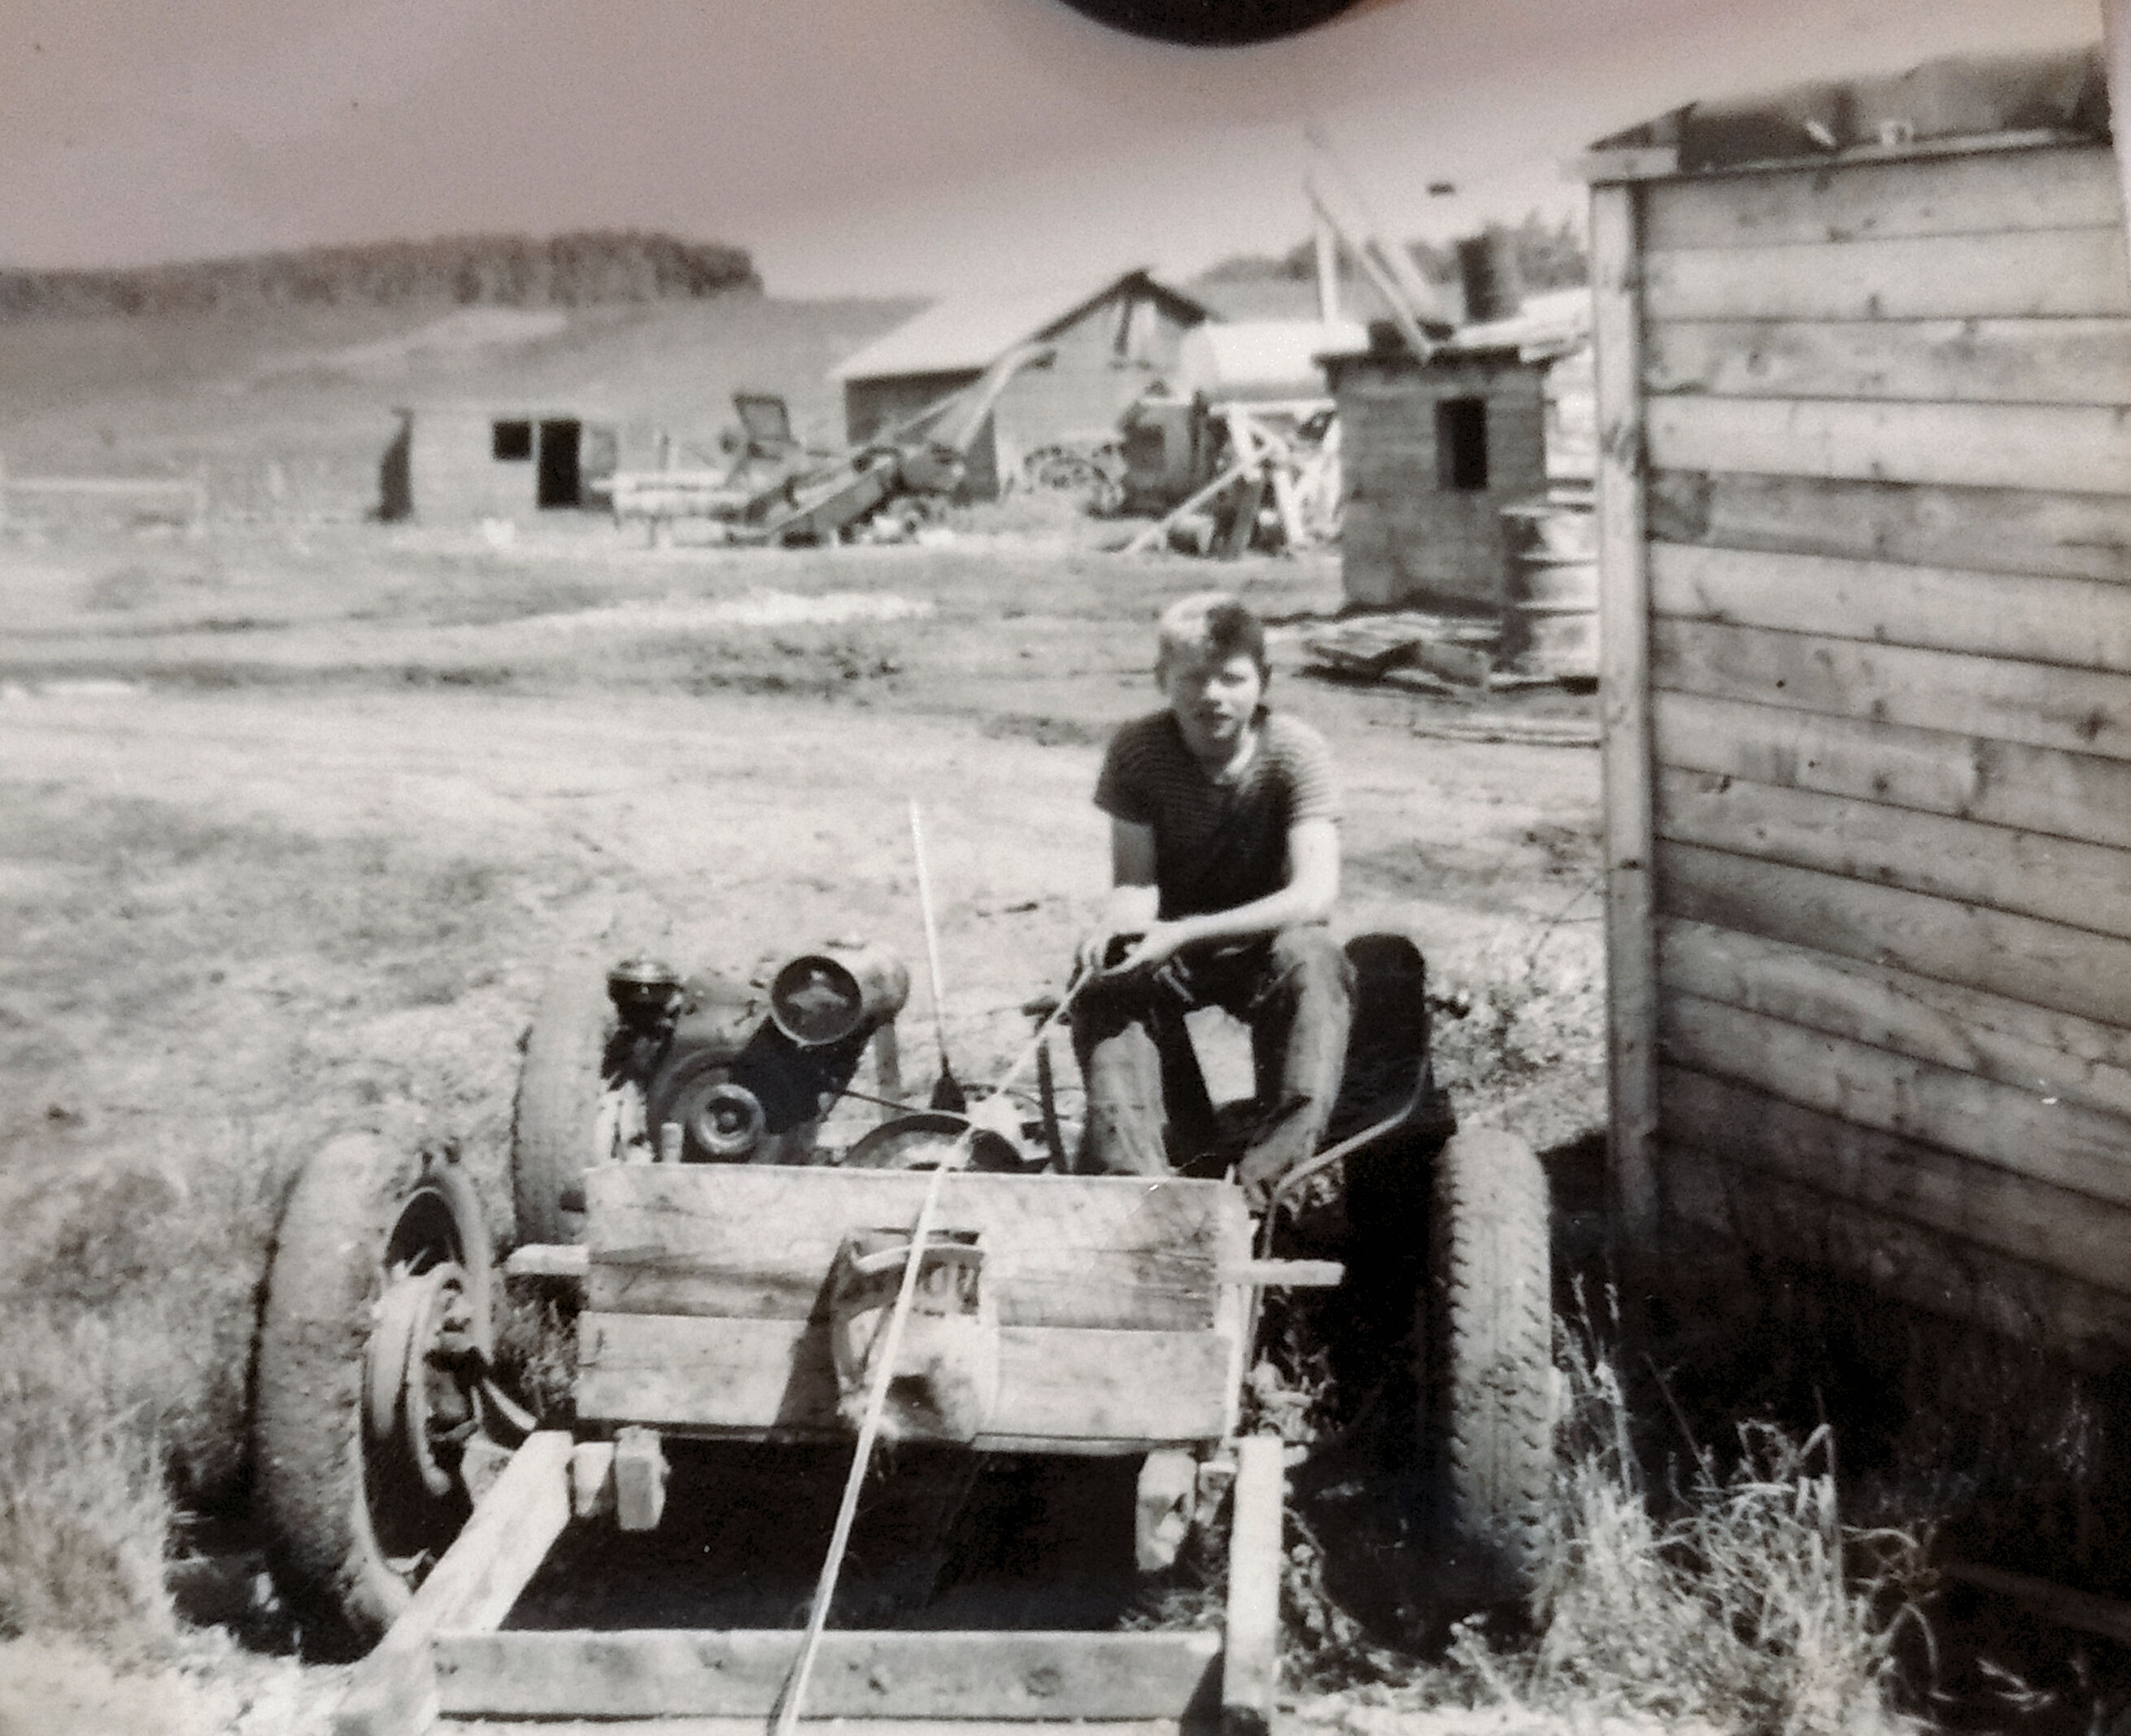 vehicle Henry built he took the pump engine for the motor.. had to take it off to water the cows.  About 1952.  He was quite the inventor.